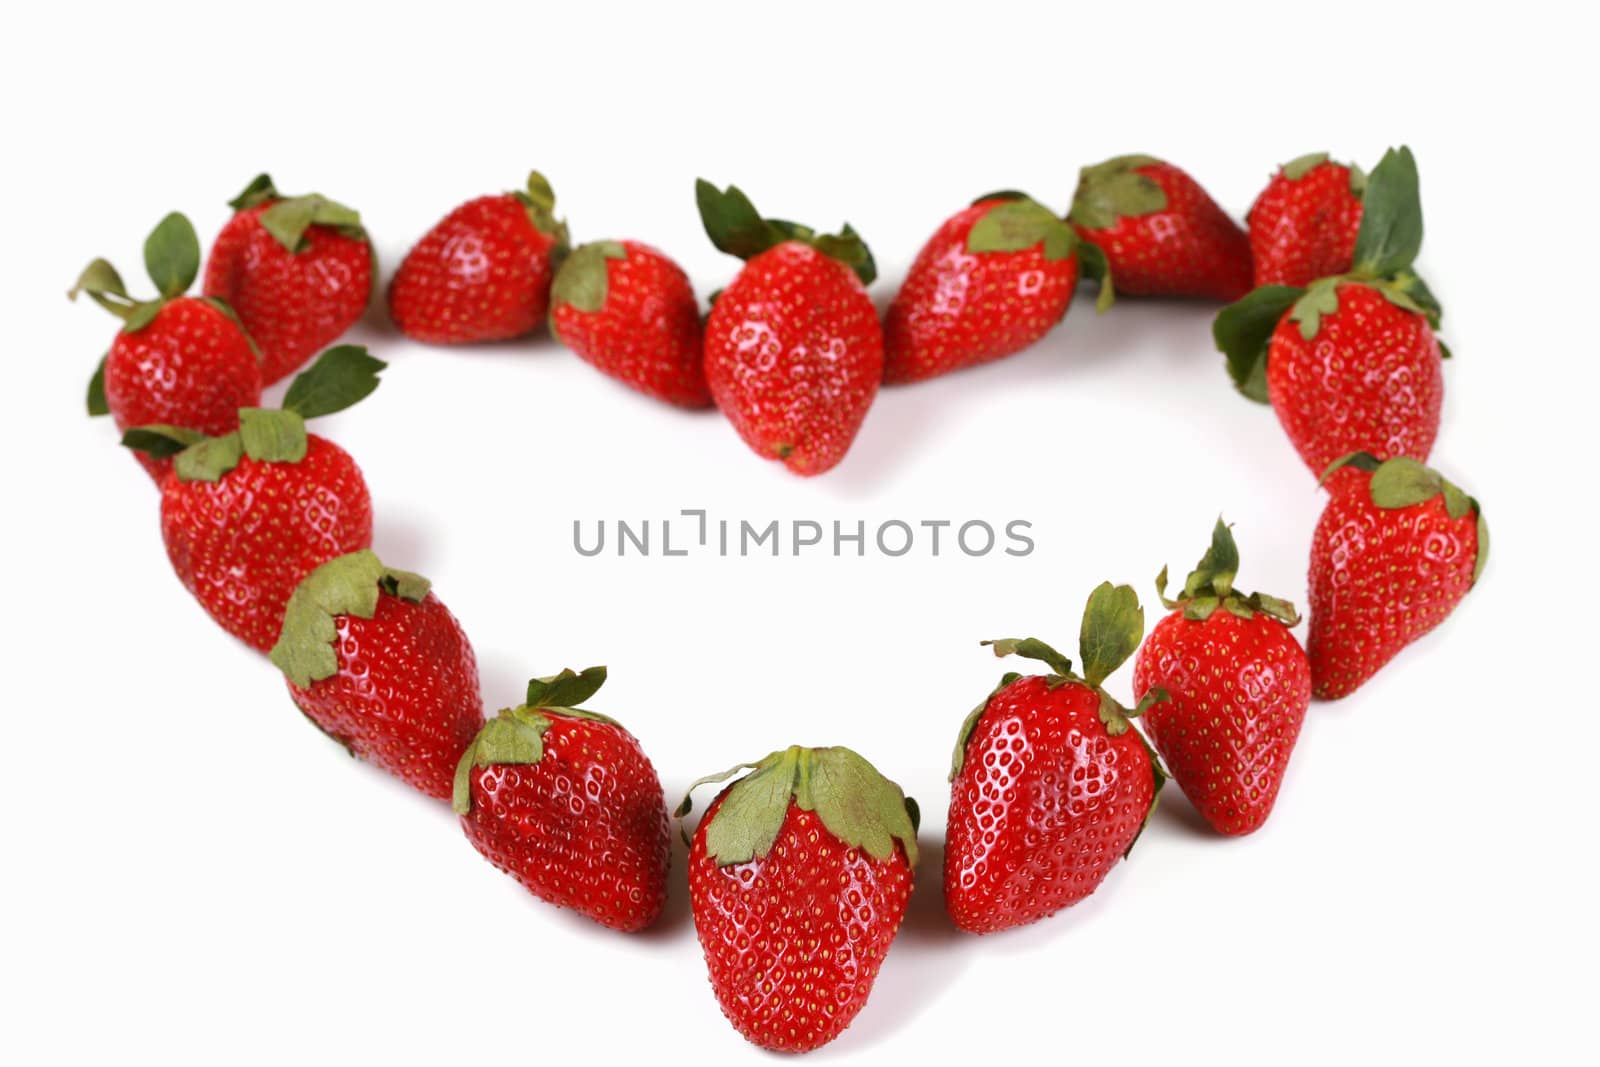 Strawberries in the shape of a heart by jarenwicklund